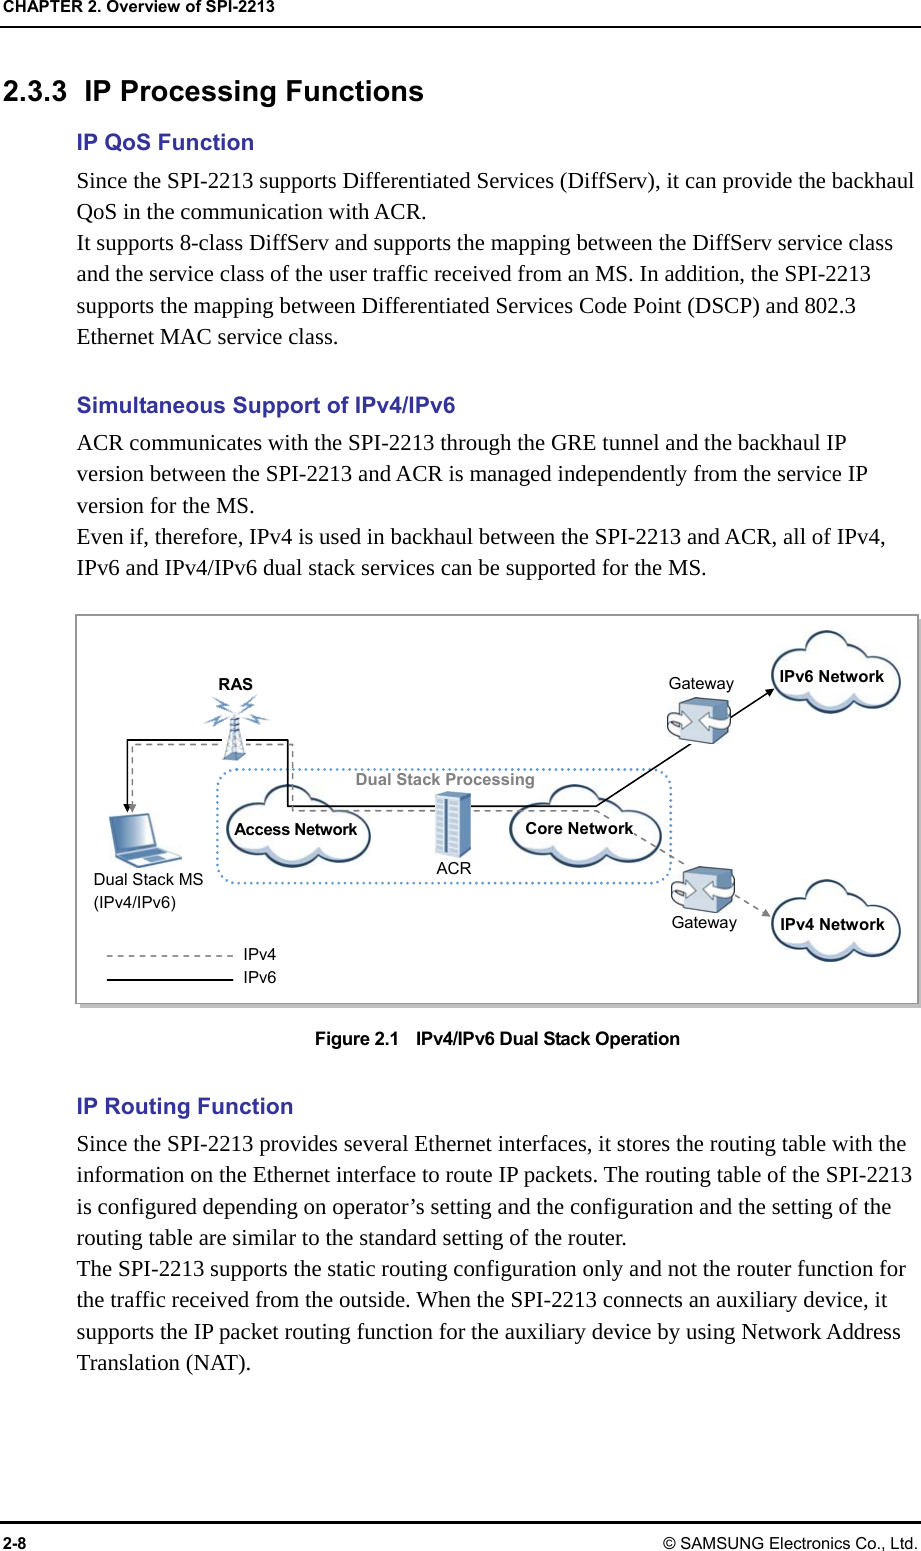 CHAPTER 2. Overview of SPI-2213 2-8 © SAMSUNG Electronics Co., Ltd. 2.3.3  IP Processing Functions IP QoS Function Since the SPI-2213 supports Differentiated Services (DiffServ), it can provide the backhaul QoS in the communication with ACR. It supports 8-class DiffServ and supports the mapping between the DiffServ service class and the service class of the user traffic received from an MS. In addition, the SPI-2213 supports the mapping between Differentiated Services Code Point (DSCP) and 802.3 Ethernet MAC service class.  Simultaneous Support of IPv4/IPv6 ACR communicates with the SPI-2213 through the GRE tunnel and the backhaul IP version between the SPI-2213 and ACR is managed independently from the service IP version for the MS. Even if, therefore, IPv4 is used in backhaul between the SPI-2213 and ACR, all of IPv4, IPv6 and IPv4/IPv6 dual stack services can be supported for the MS.  Figure 2.1    IPv4/IPv6 Dual Stack Operation  IP Routing Function Since the SPI-2213 provides several Ethernet interfaces, it stores the routing table with the information on the Ethernet interface to route IP packets. The routing table of the SPI-2213 is configured depending on operator’s setting and the configuration and the setting of the routing table are similar to the standard setting of the router. The SPI-2213 supports the static routing configuration only and not the router function for the traffic received from the outside. When the SPI-2213 connects an auxiliary device, it supports the IP packet routing function for the auxiliary device by using Network Address Translation (NAT).  IPv4 IPv6 Dual Stack MS (IPv4/IPv6) RAS ACRIPv6 Network IPv4 Network Access Network Dual Stack Processing Gateway Gateway Core Network 